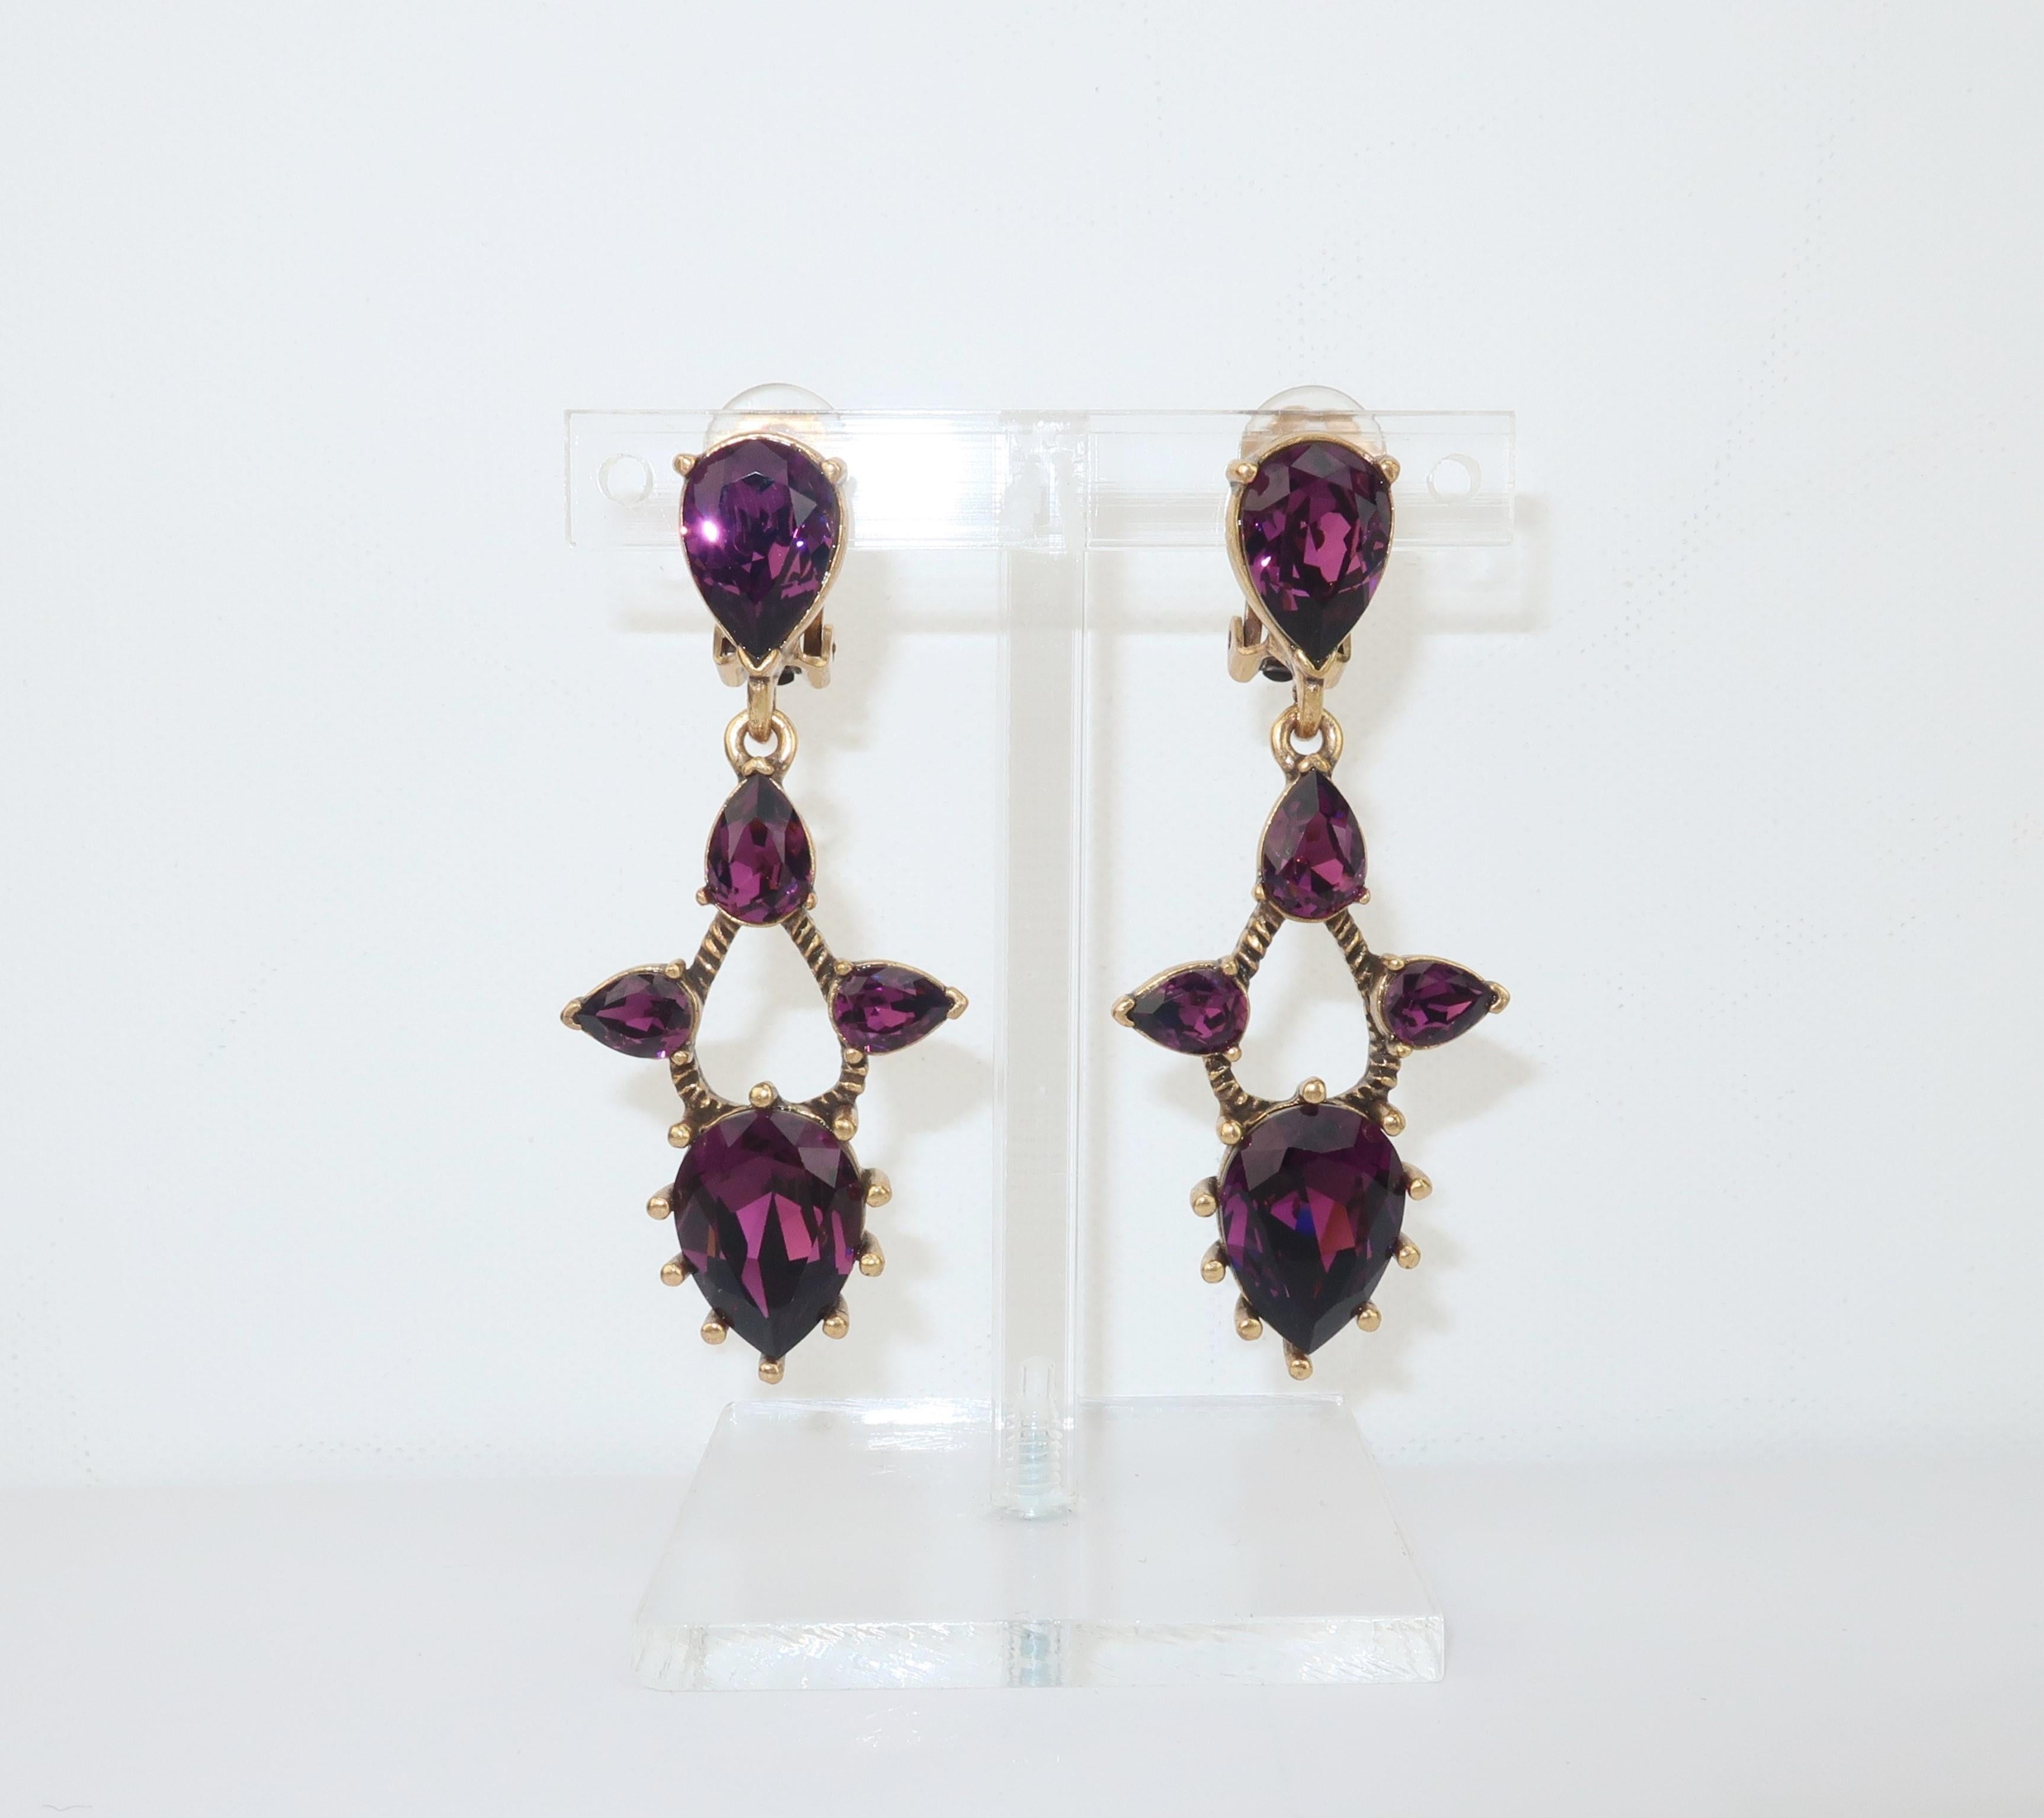 Ohhhh Oscar!  Gorgeous Oscar de La Renta amethyst crystal dangle earrings with a detailed gold tone setting and clip on hardware.  Signed at the back and also marked 'Made in U.S.A.'.  Sizable but comfortable enough for all day wear.
CONDITION
Very